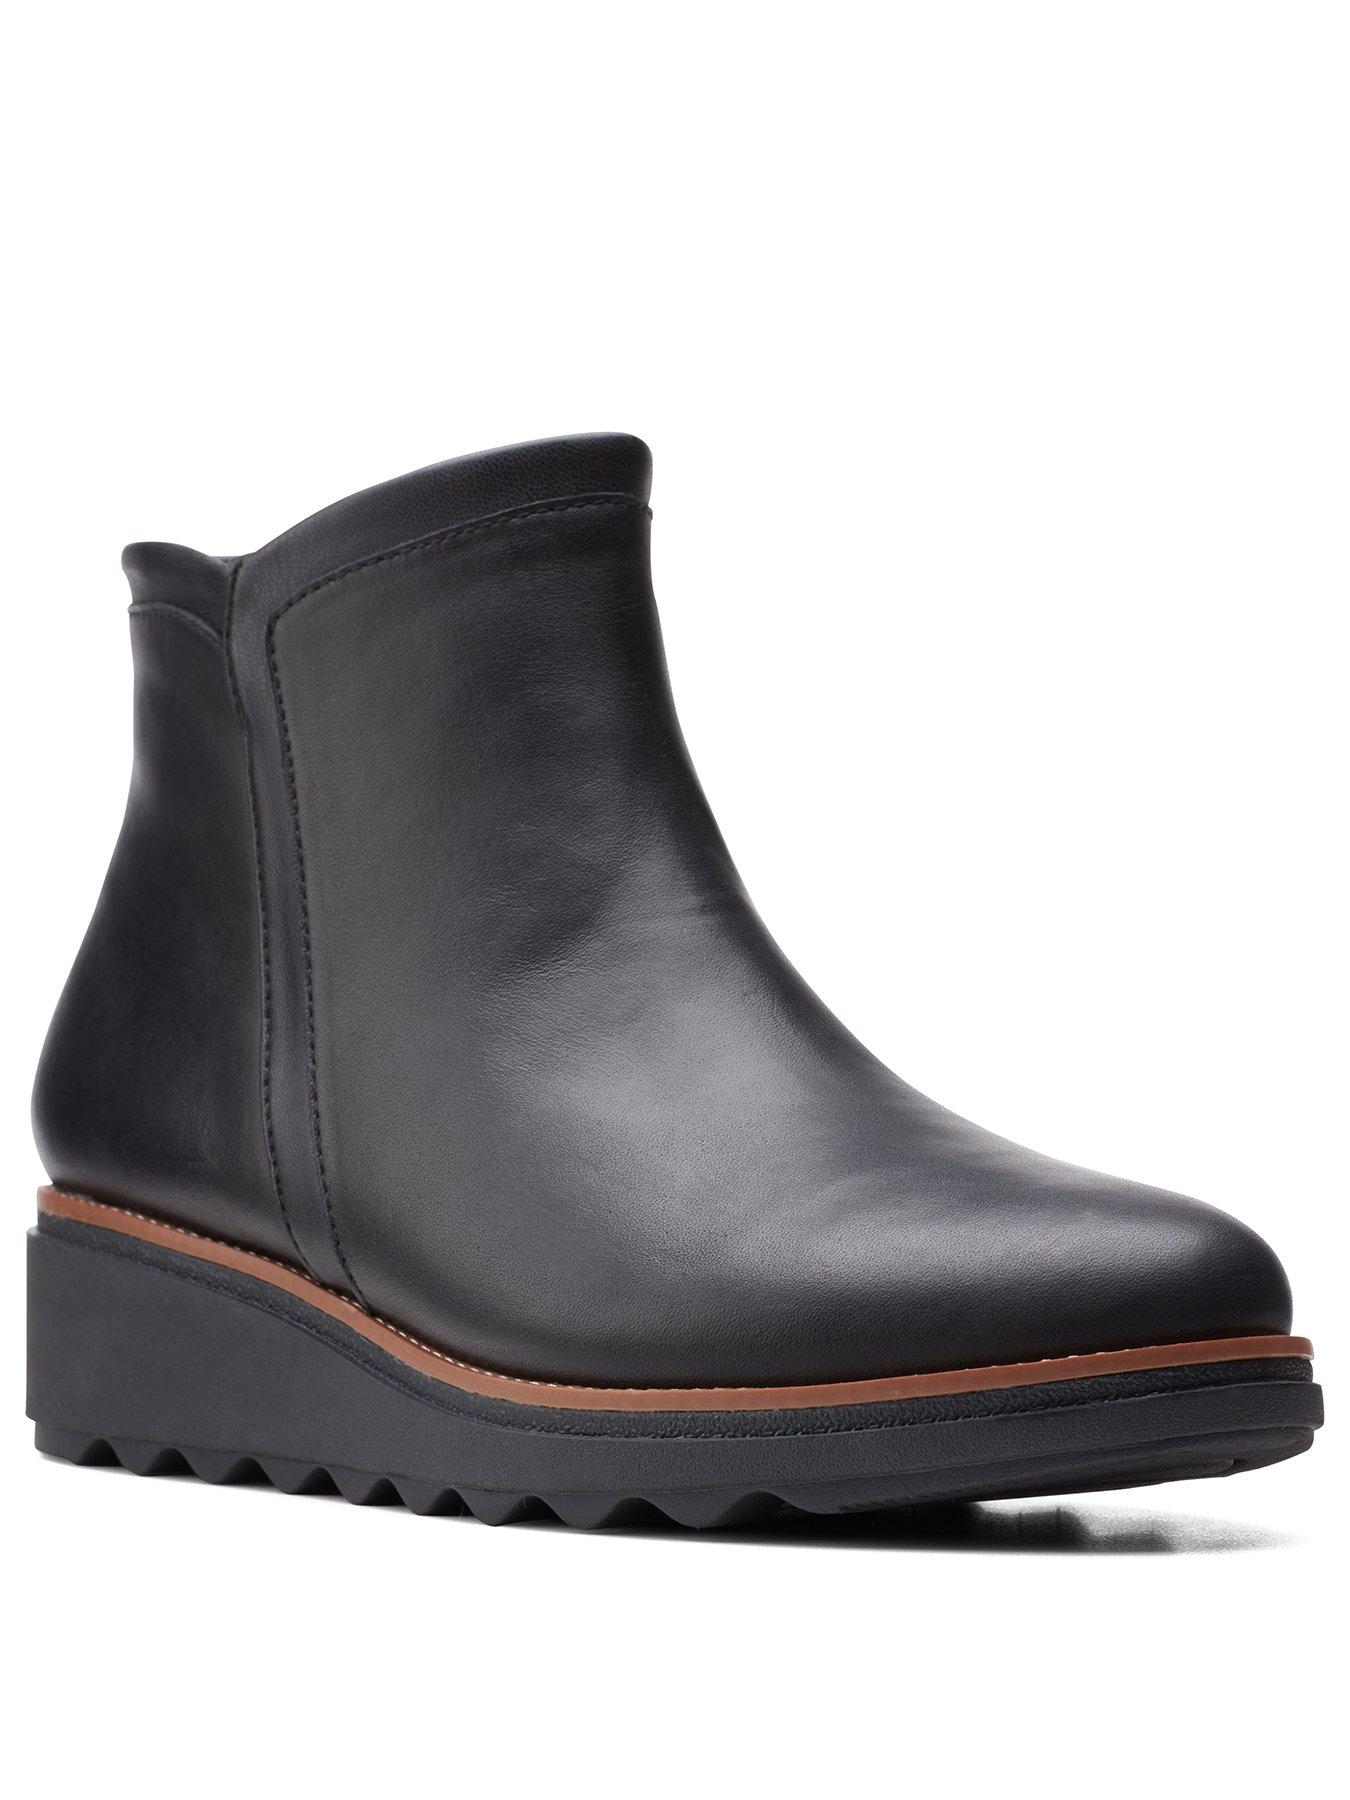 clarks black wedge ankle boots